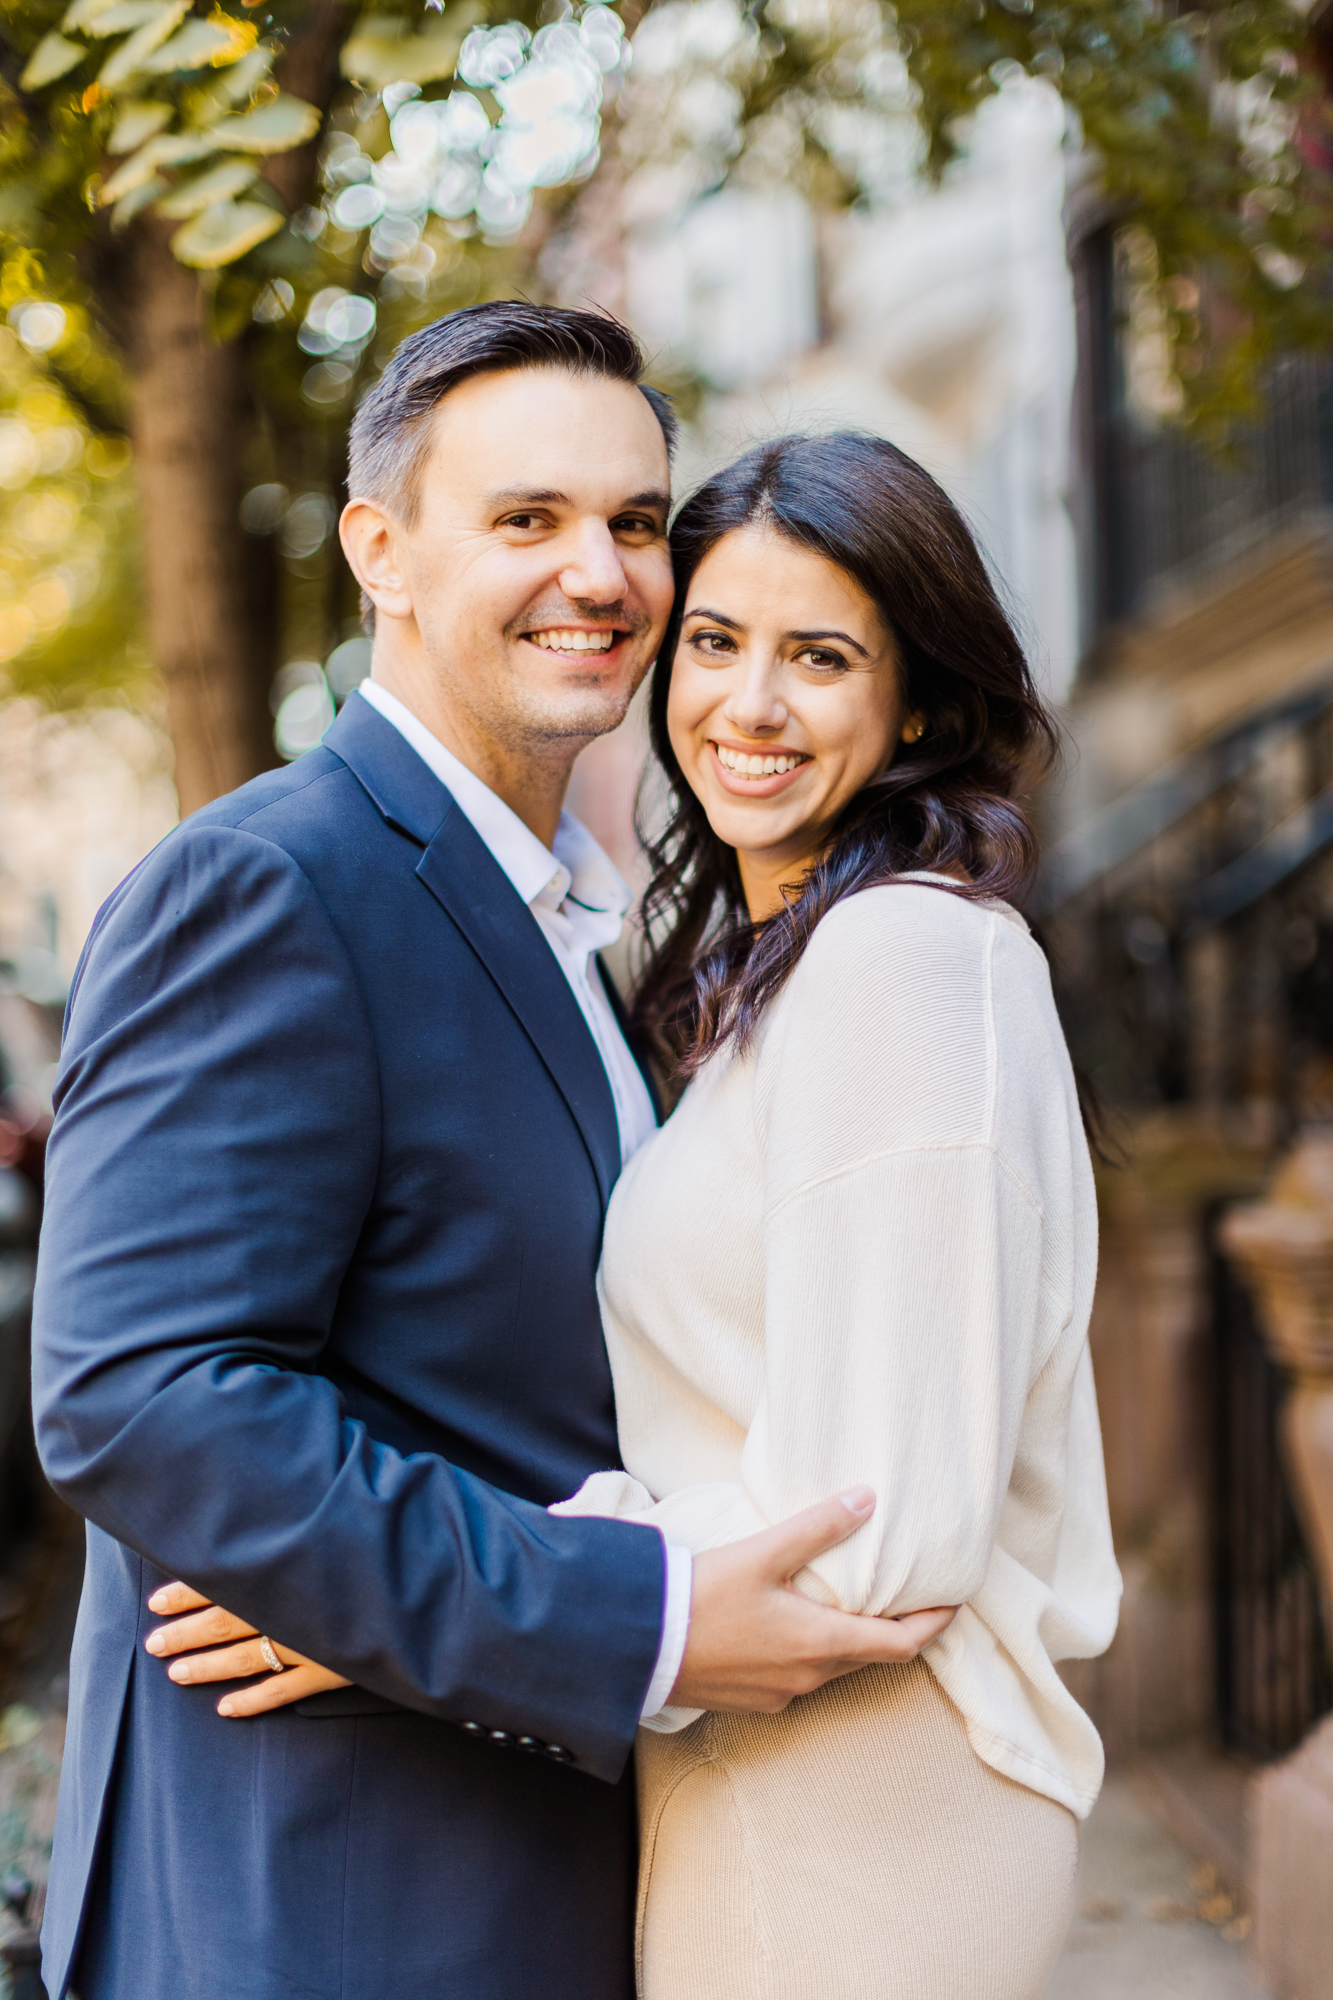 Flawless Upper West Side Engagement Photo Shoot in NYC